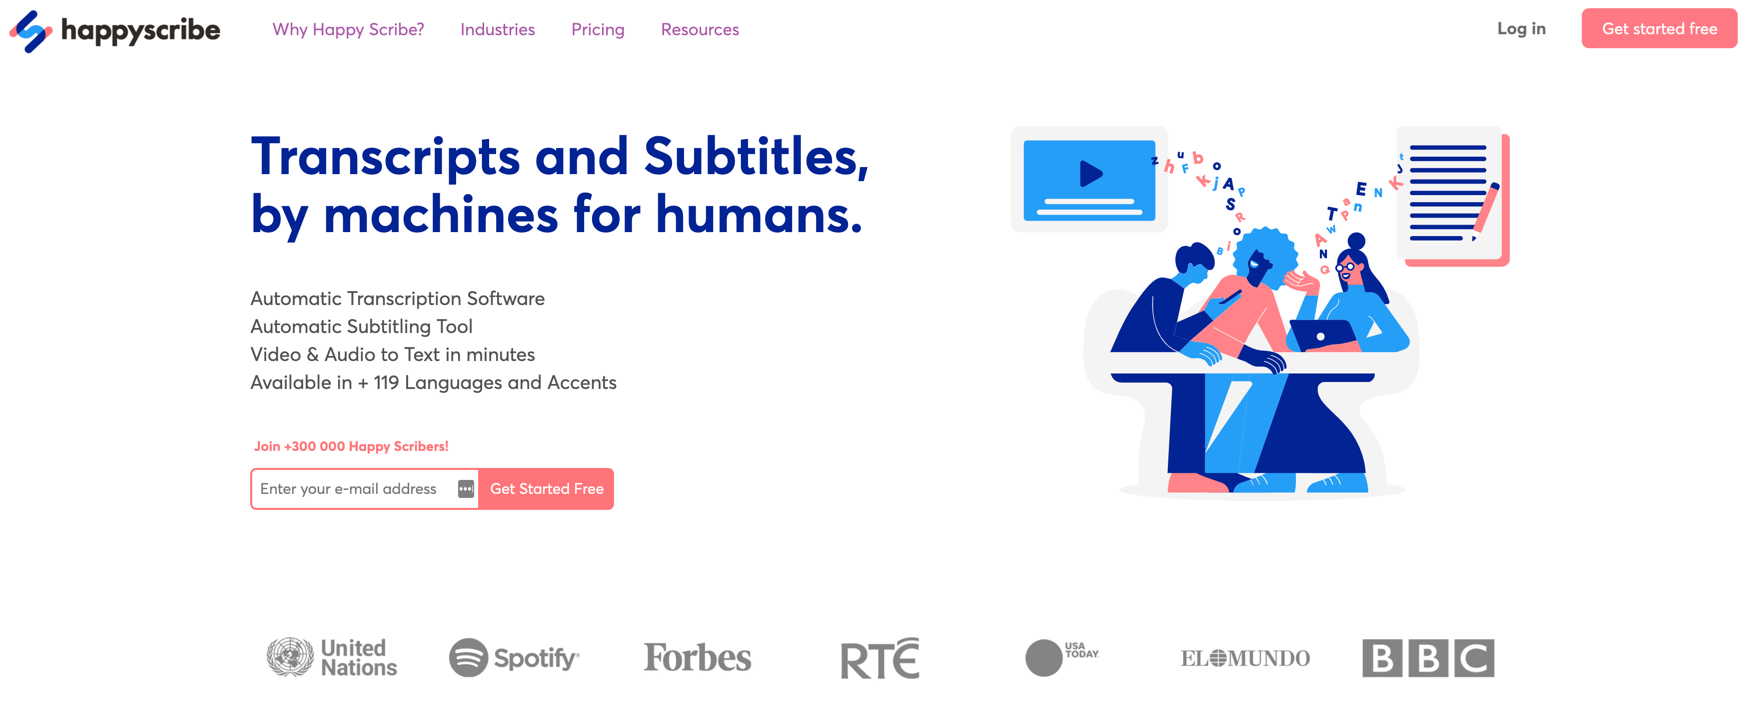 Happy Scribe landing page